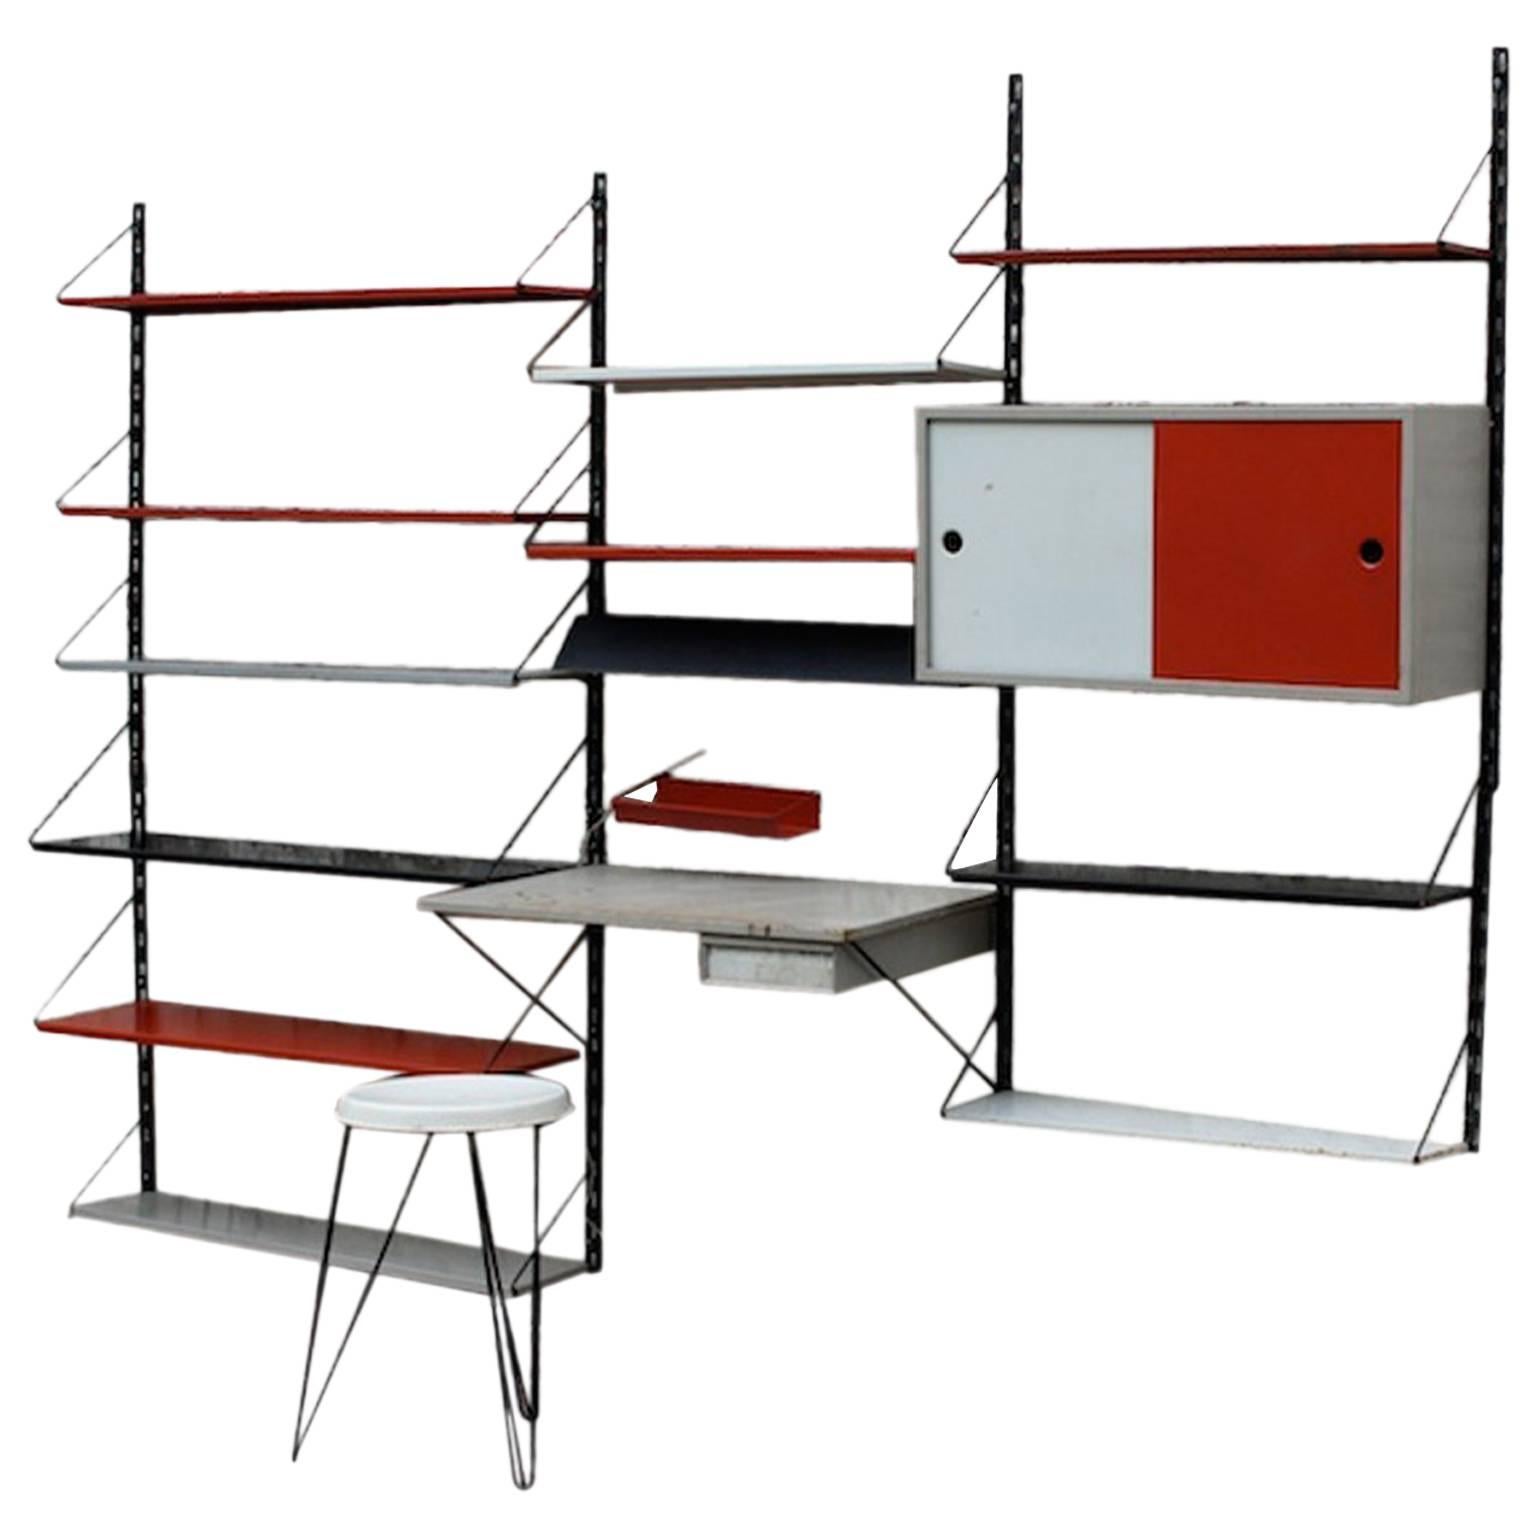 Wall System or Unit by Tjerk Reijenga for Pilastro, Dutch Design 1955 For Sale